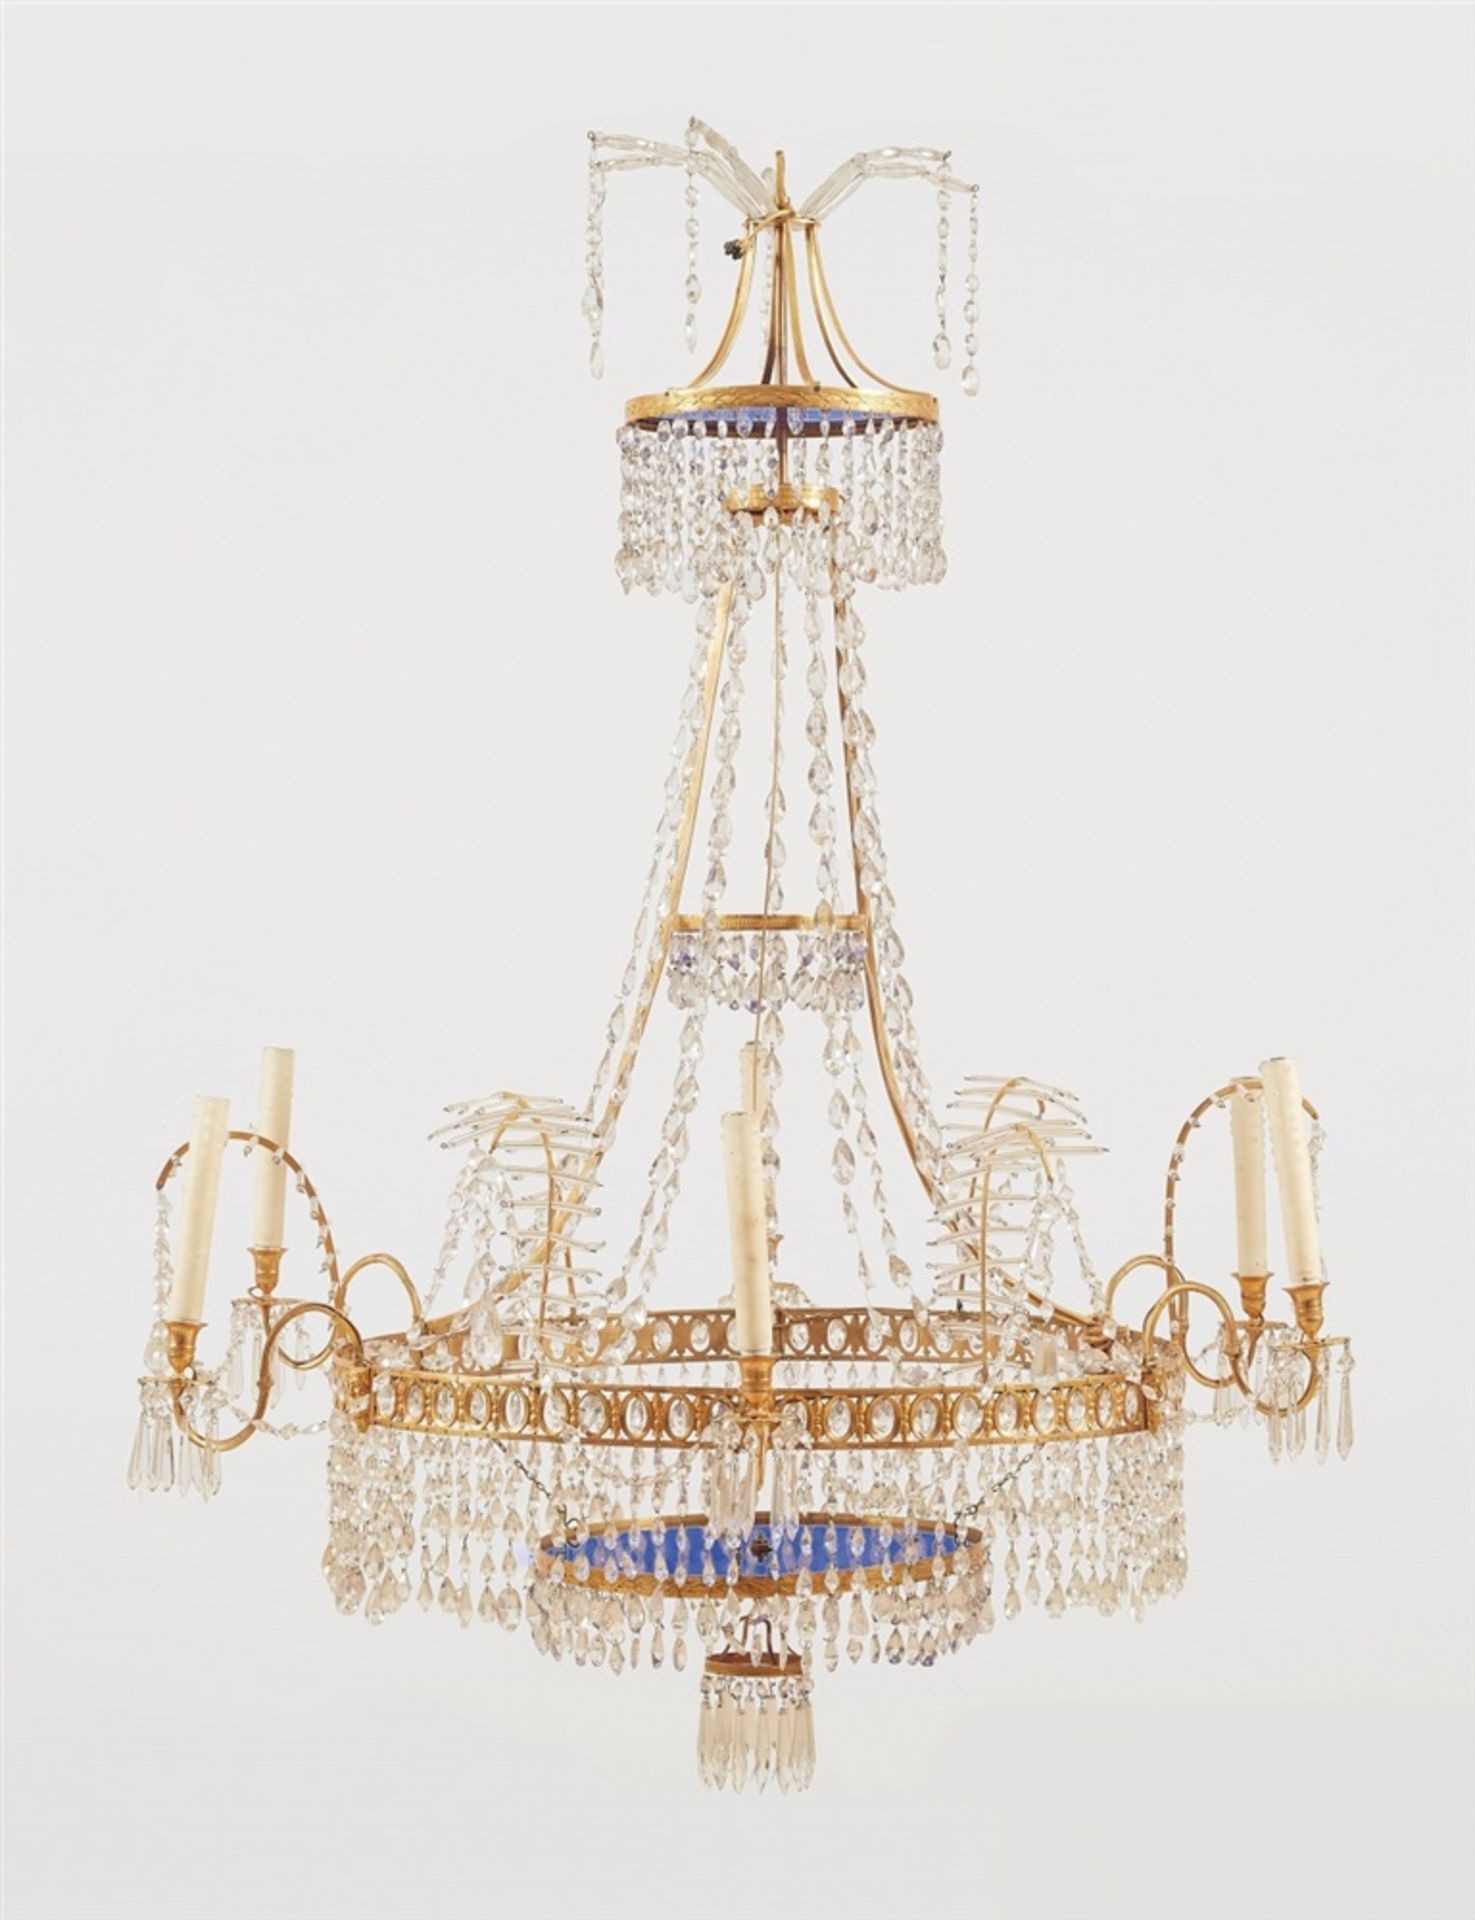 A Neoclassical chandelierOrmolu chandelier with cut glass droplets and blue glass panes. Six - Bild 2 aus 2